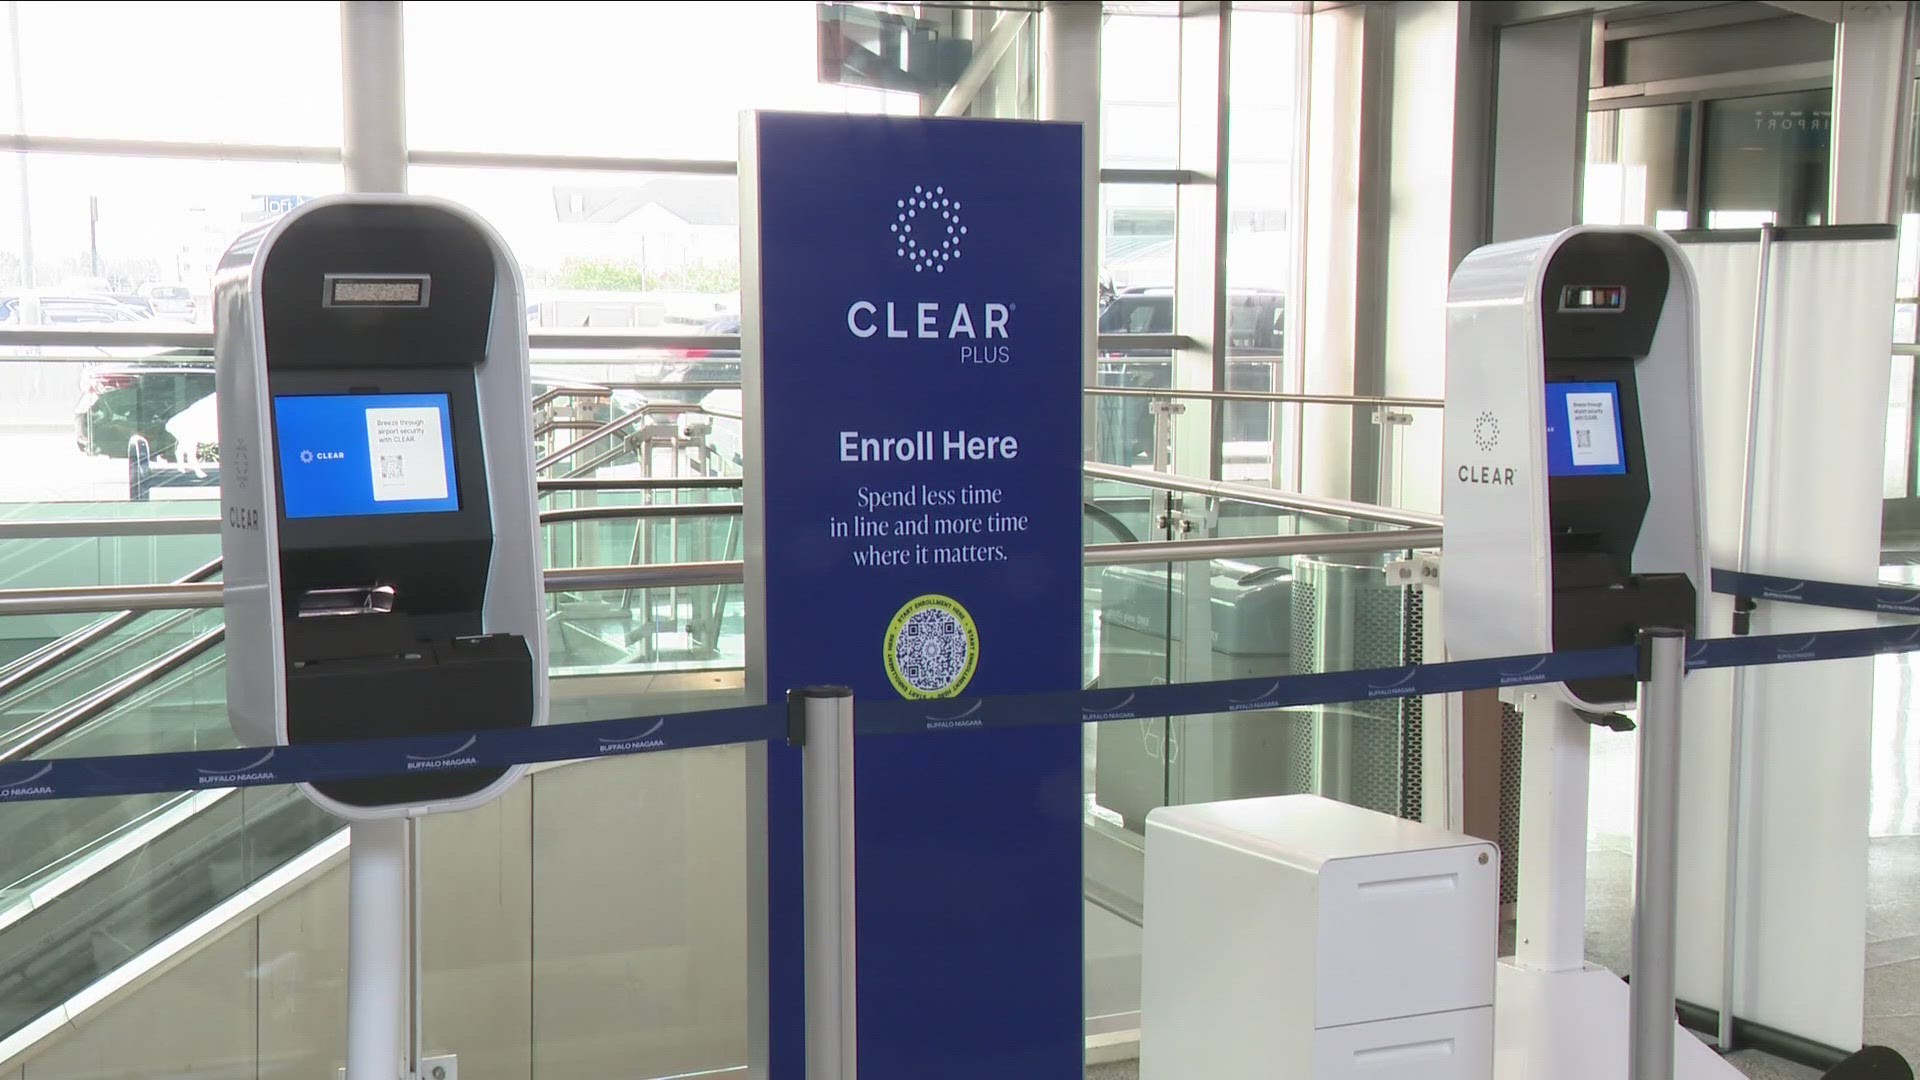 New service allows the user to skip to the front of the security line